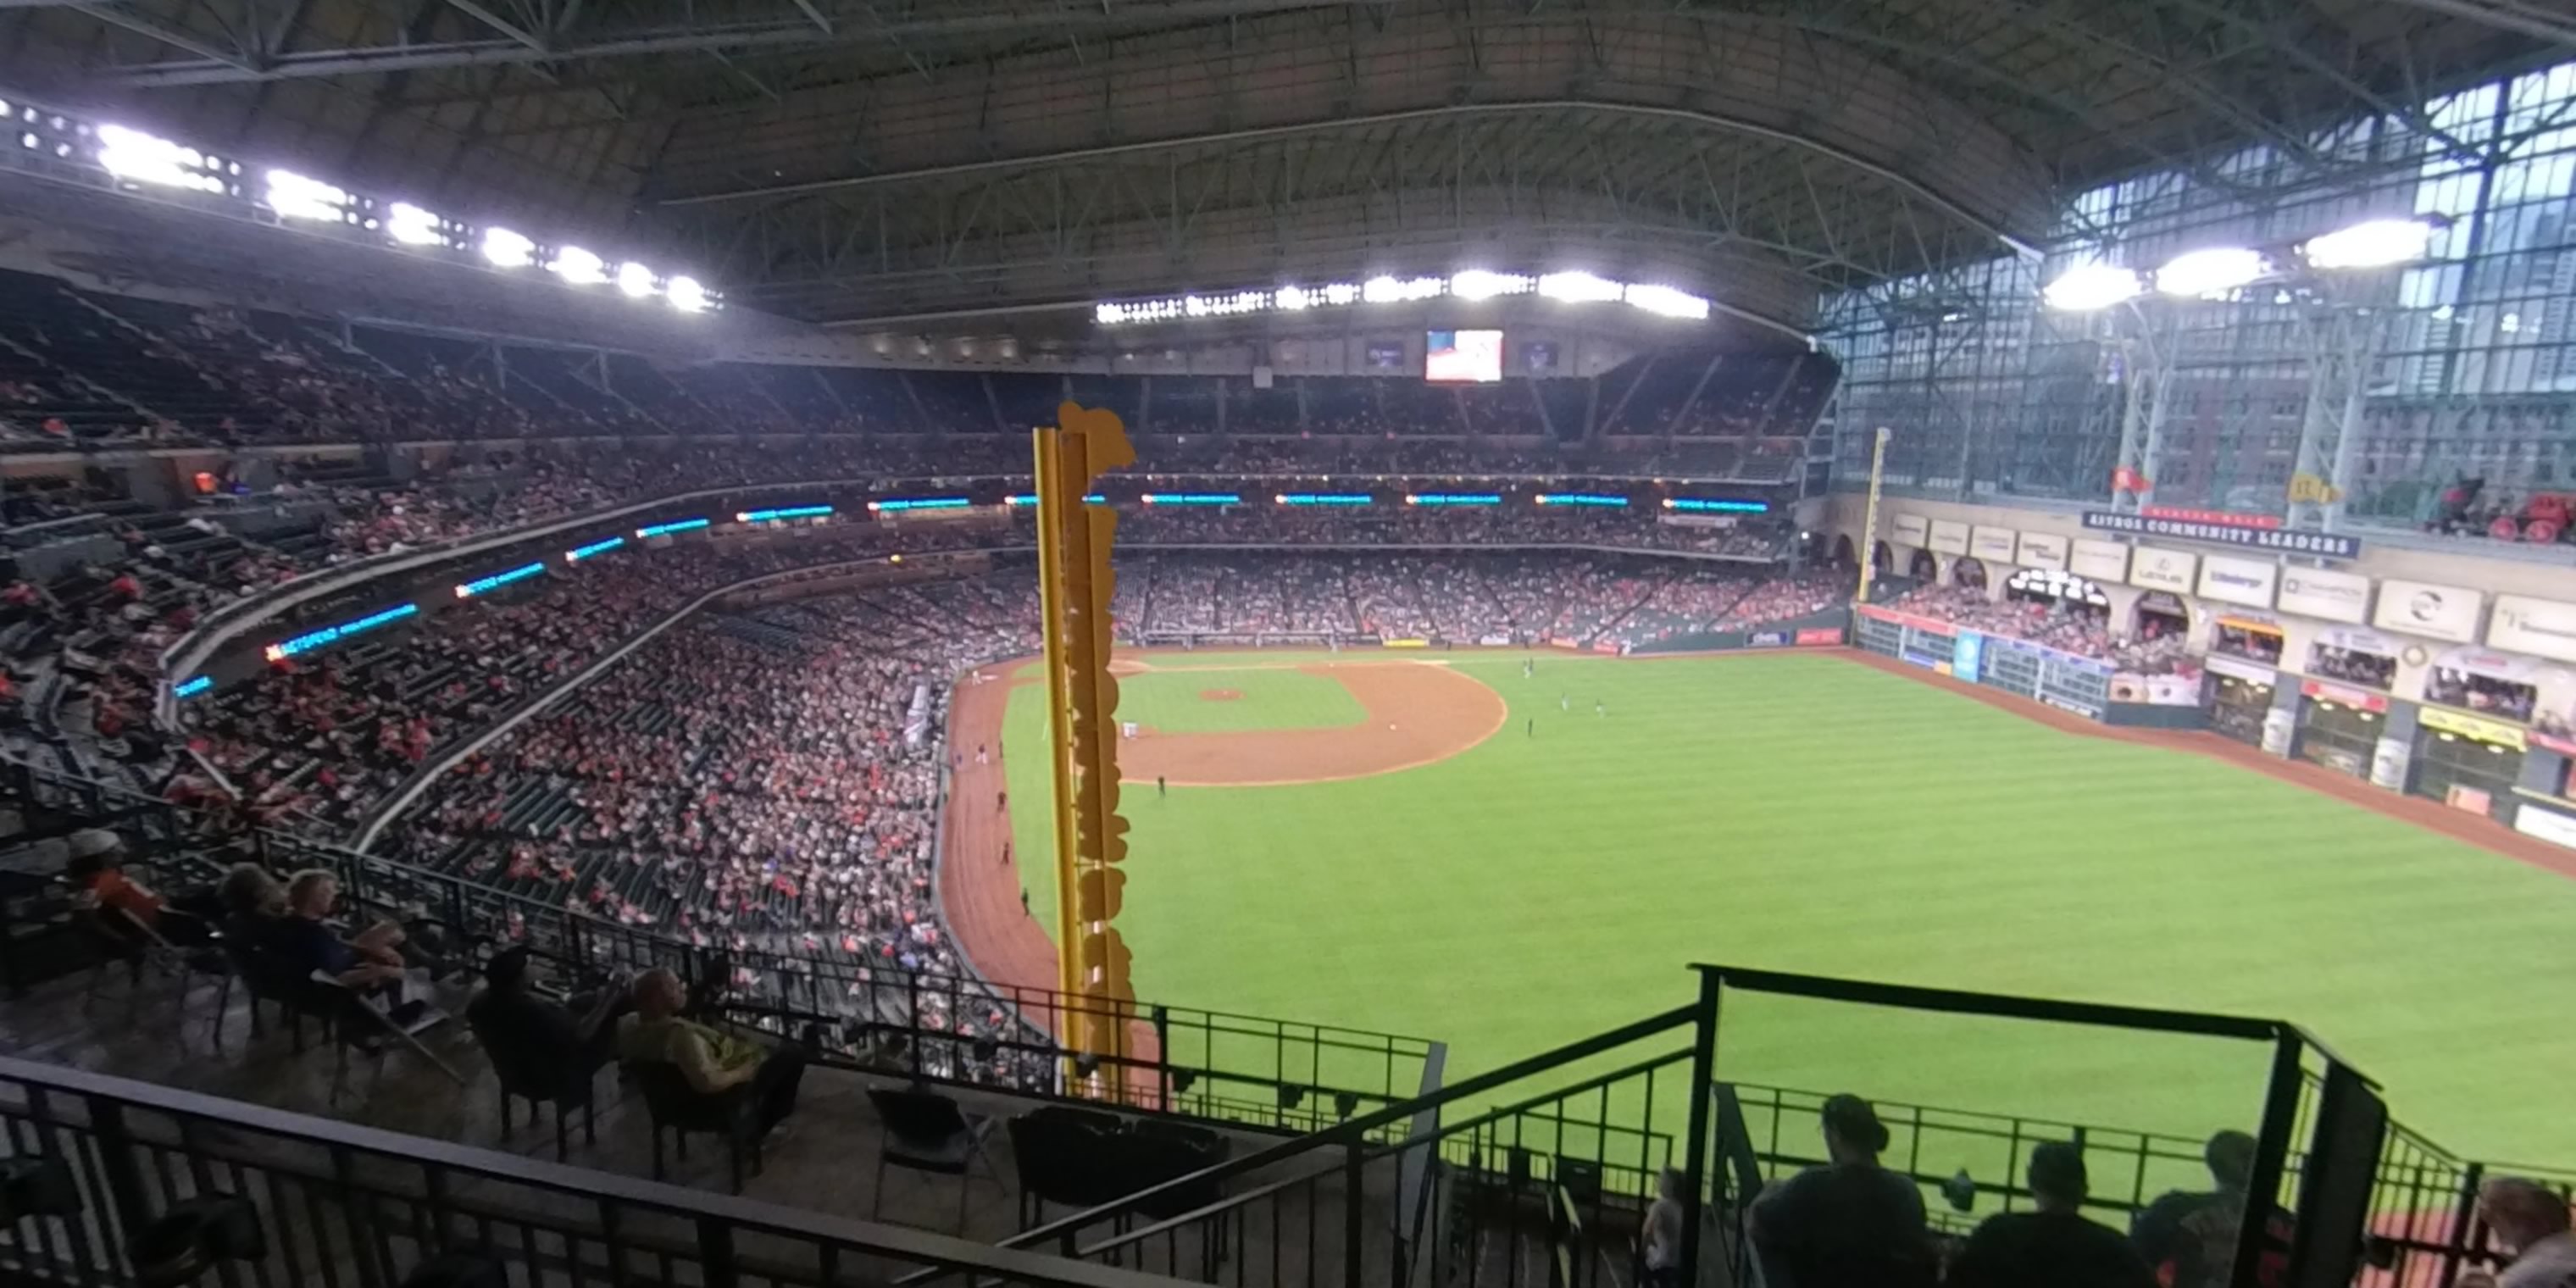 section 437 panoramic seat view  for baseball - minute maid park